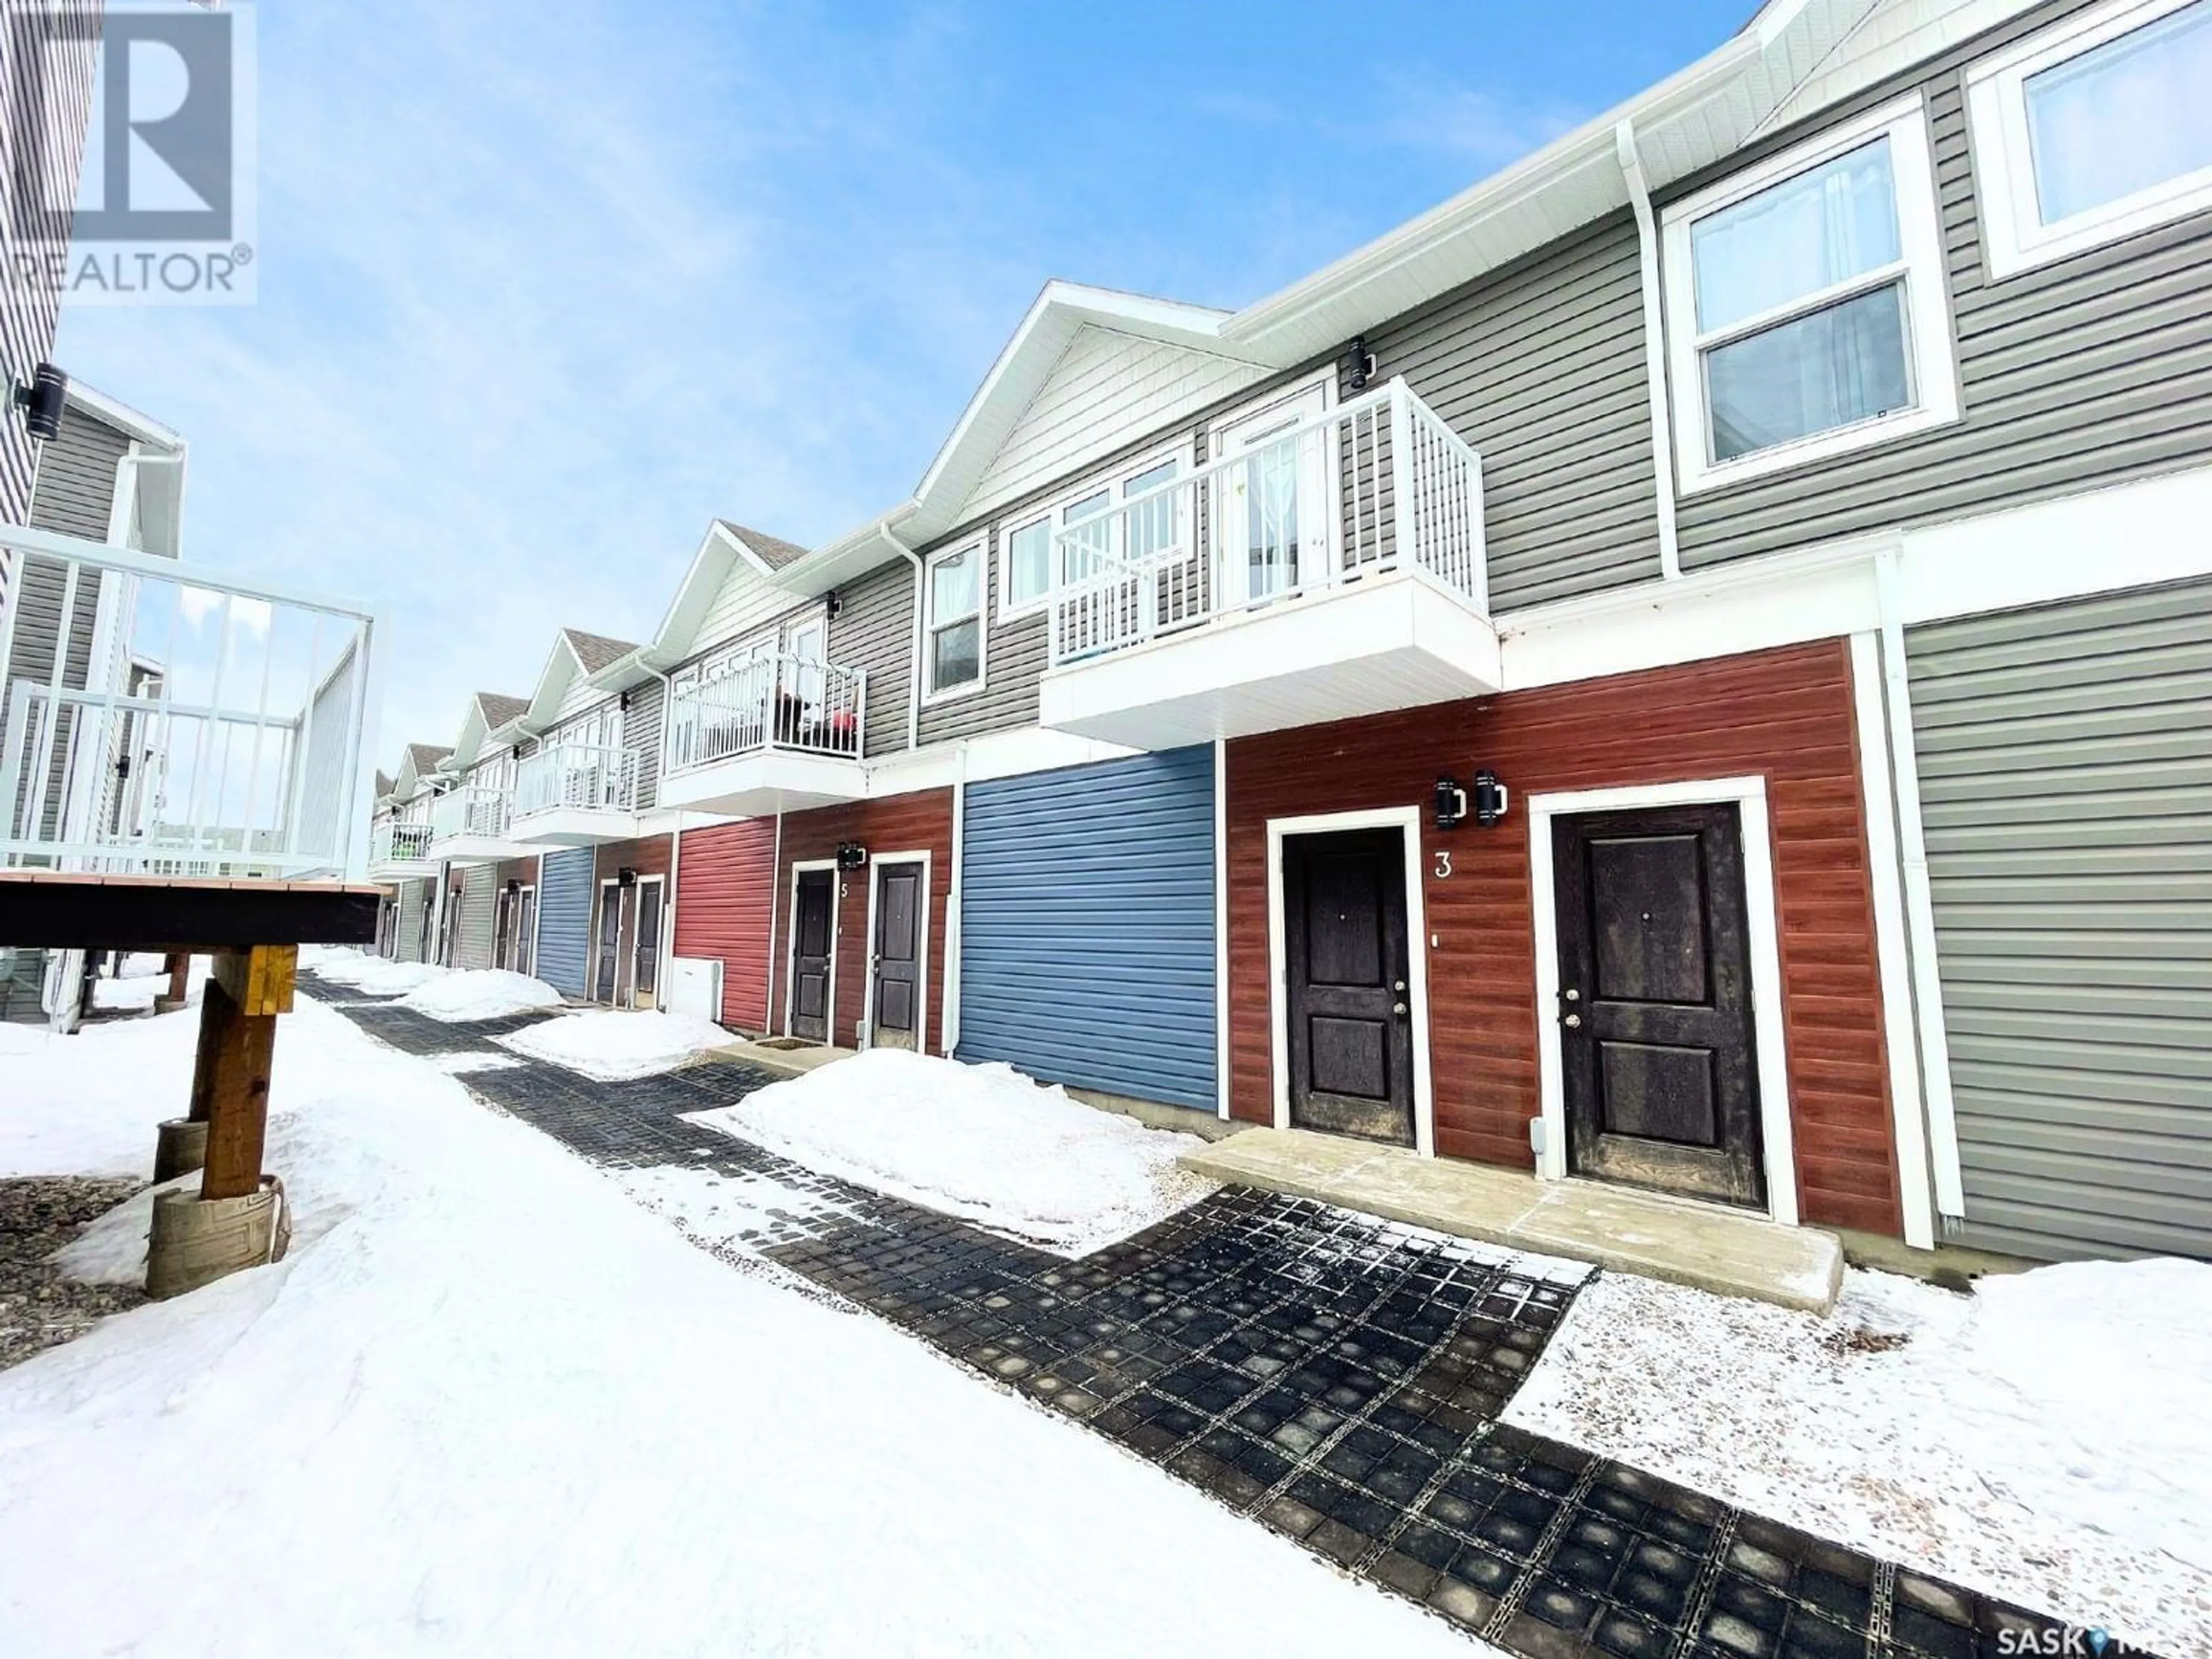 A pic from exterior of the house or condo for 3 401 L AVENUE S, Saskatoon Saskatchewan S7M5Y6